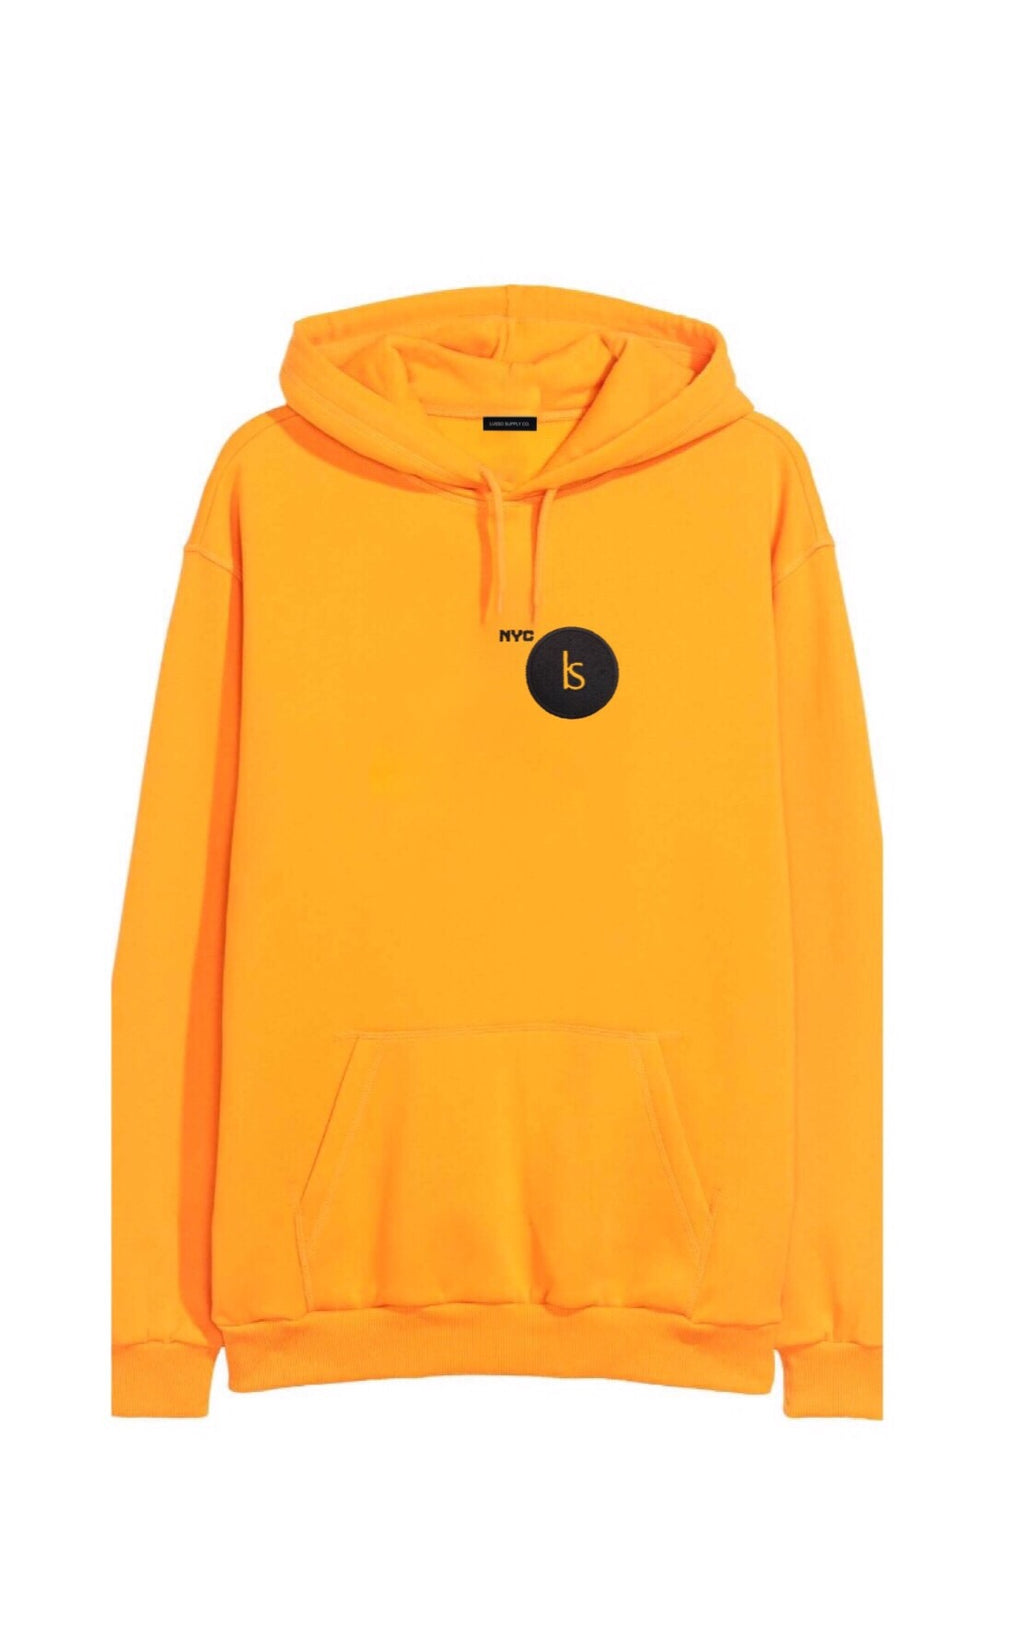 NY5 Byway Hoodie (NYC TAXICAB YELLOW) Limited Edition